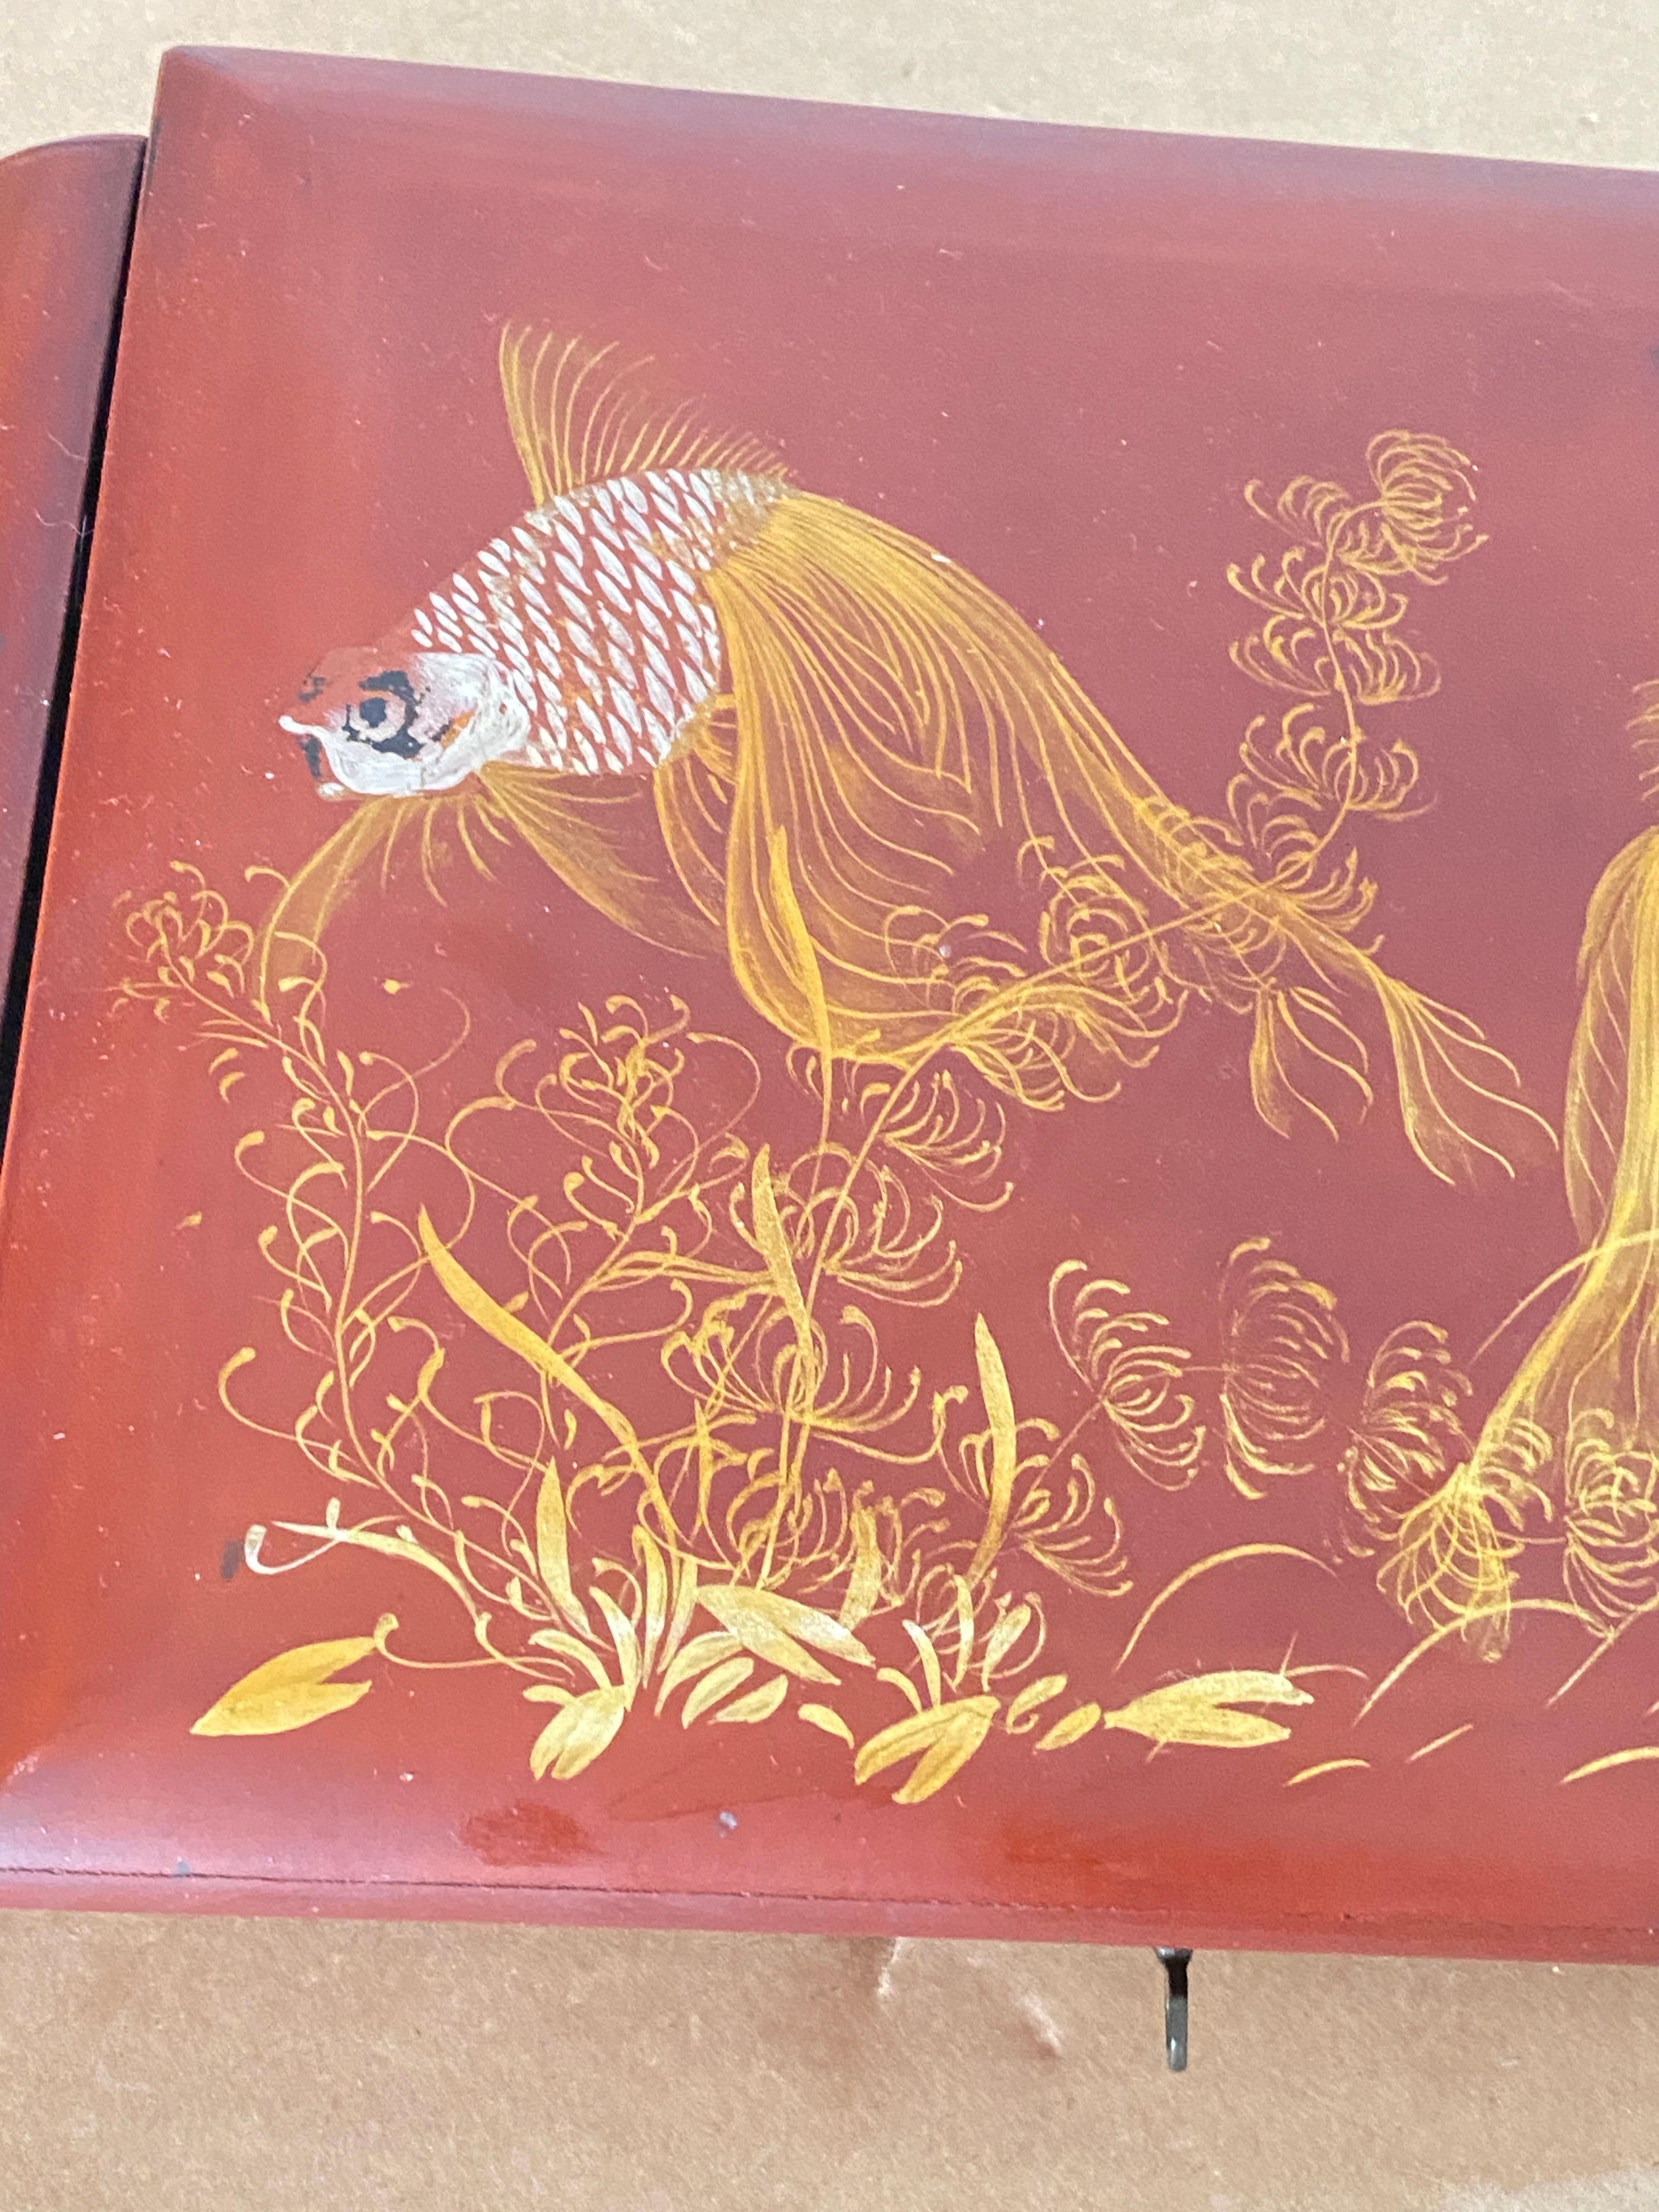 Large box from Vietnam. Manufactured at the end of the 19th century. Red in color slightly pinkish, with magnificent fish decorations in white and yellow colors. This box locks, the system works. Inside on the inner fold-out panel is a mirror that